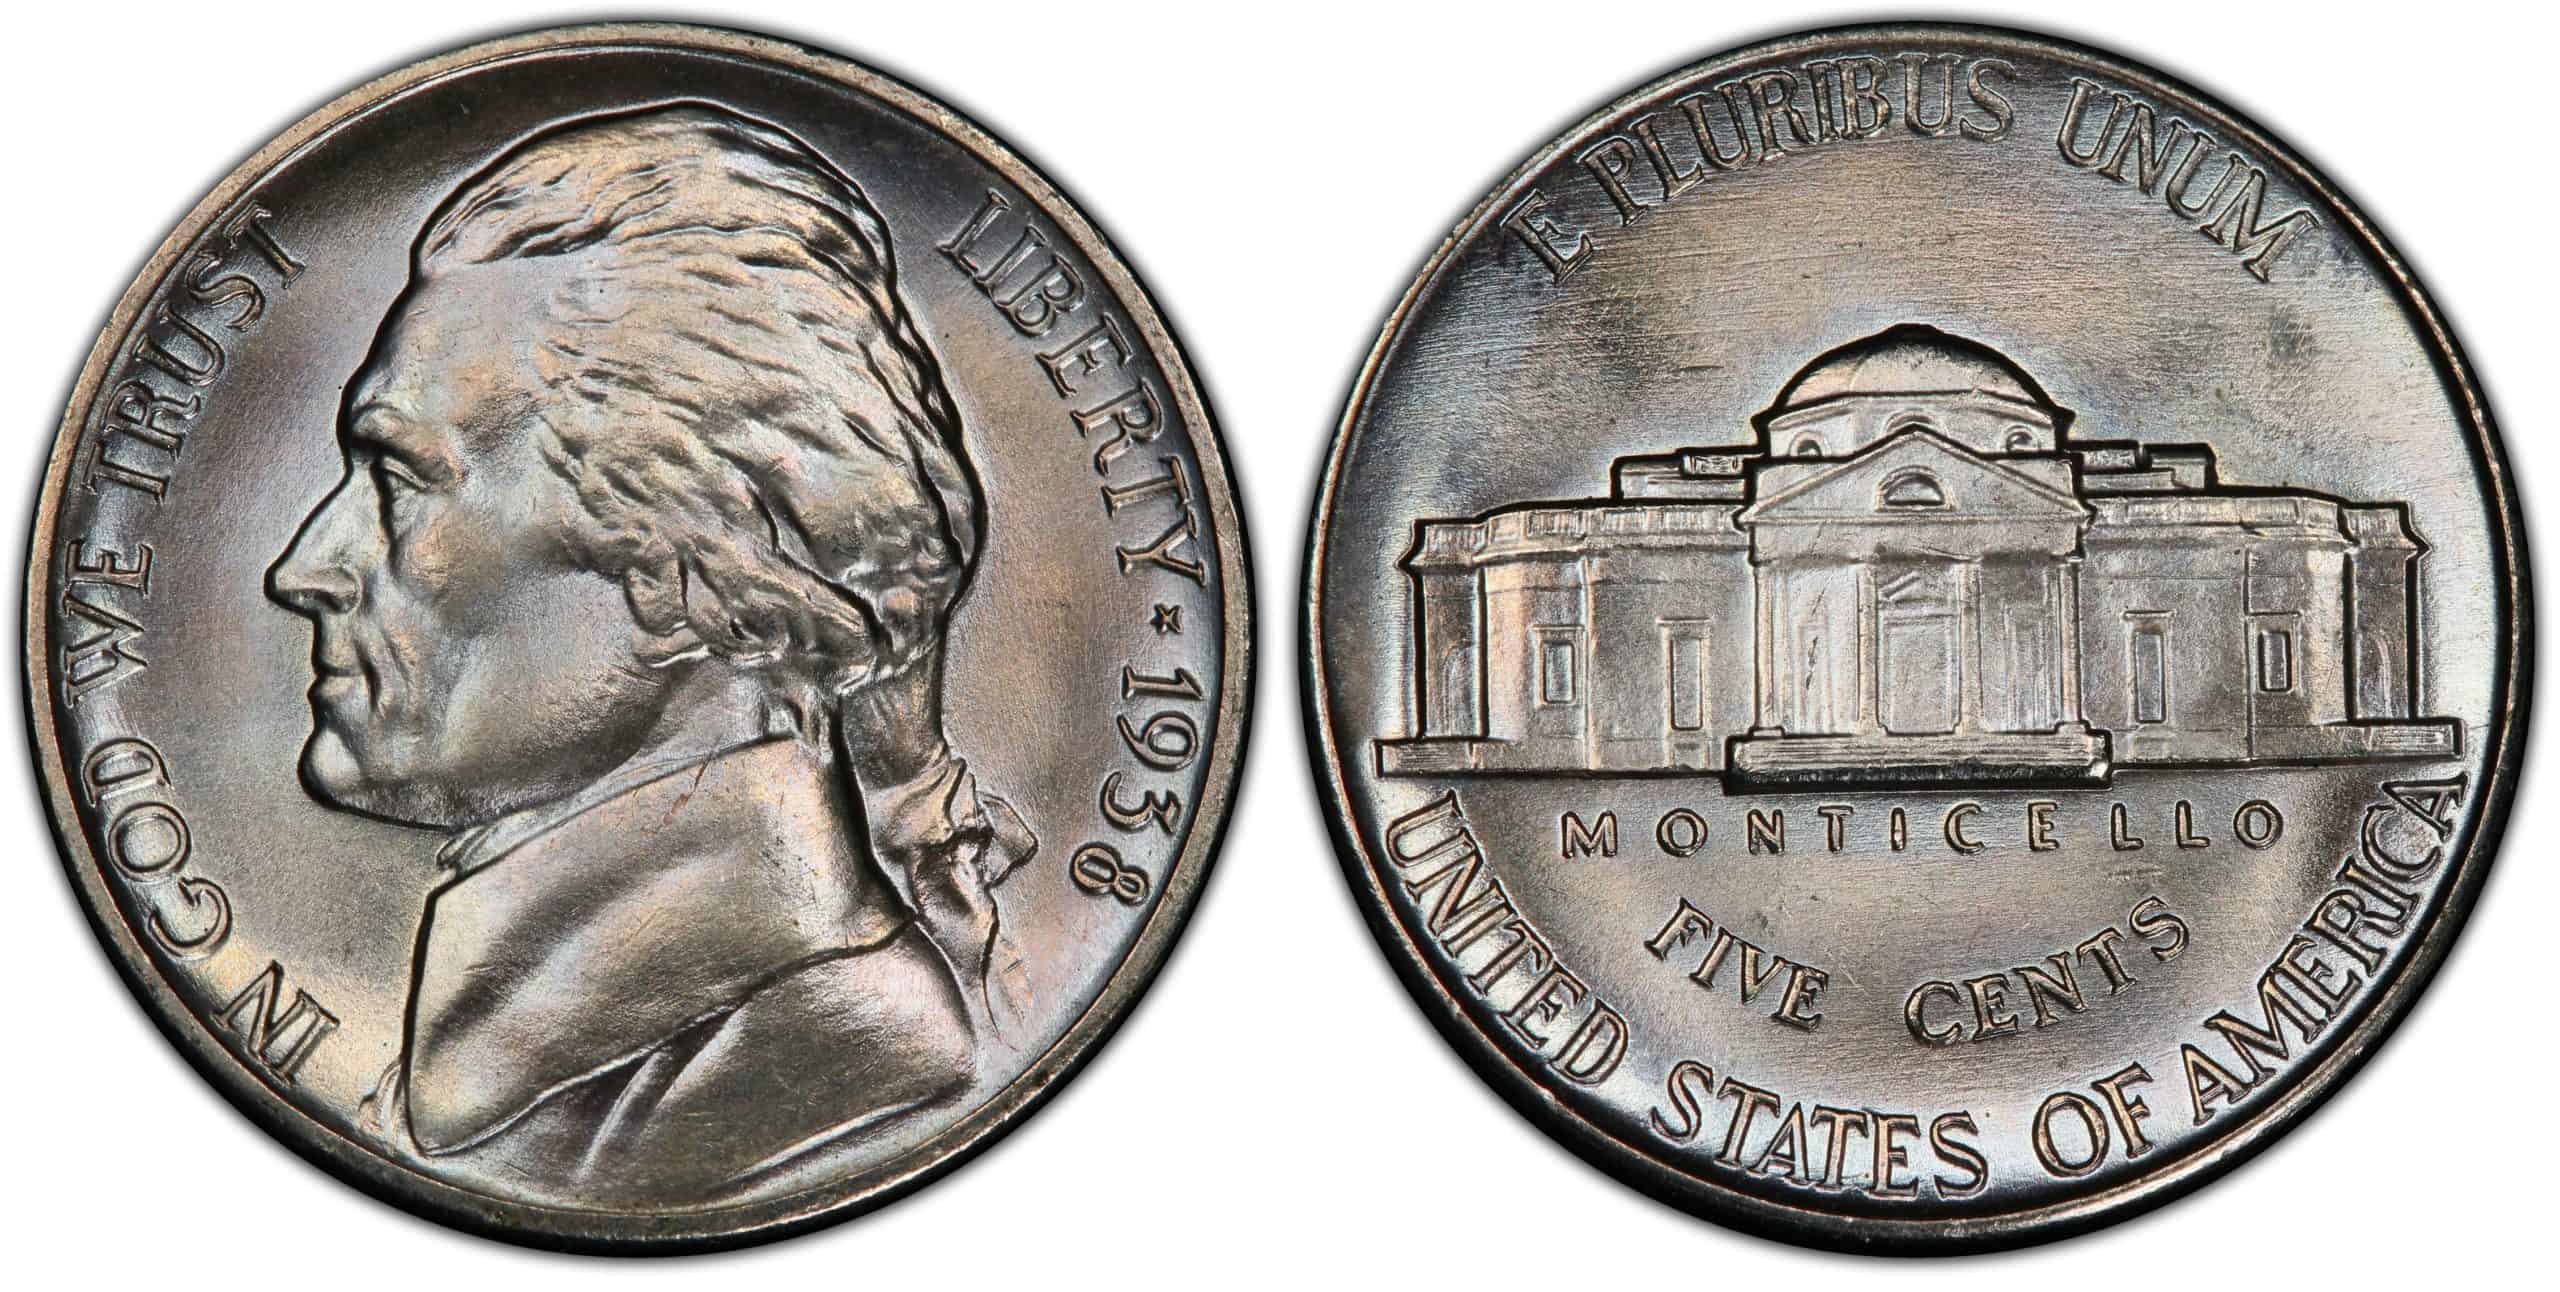 1938 Jefferson nickel without a mint mark